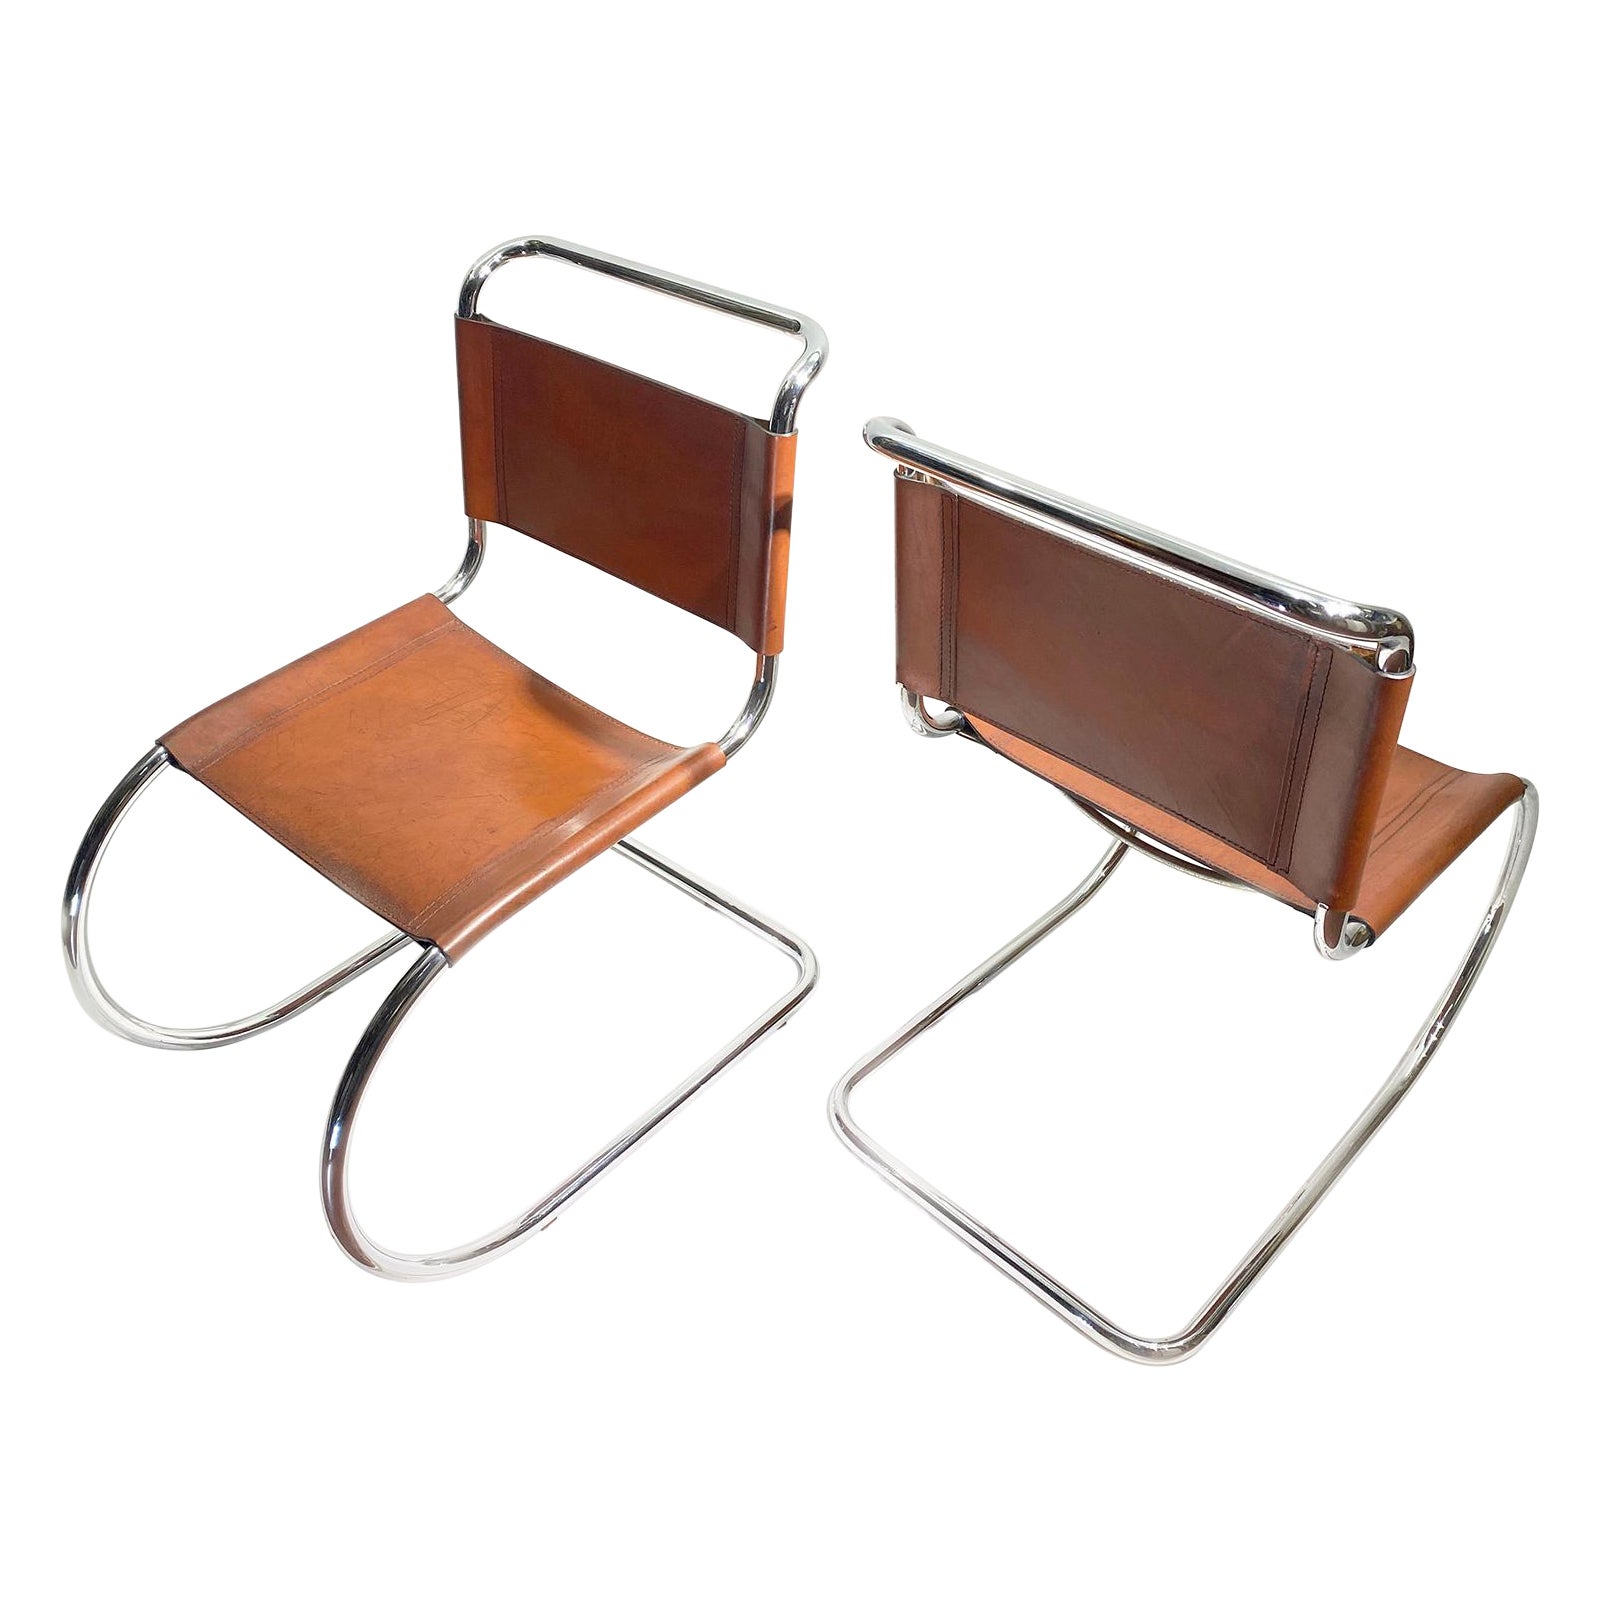 Pair of Ludwig Mies van der Rohe, Mr10 Cantilever Chairs in Leather, for Thonet